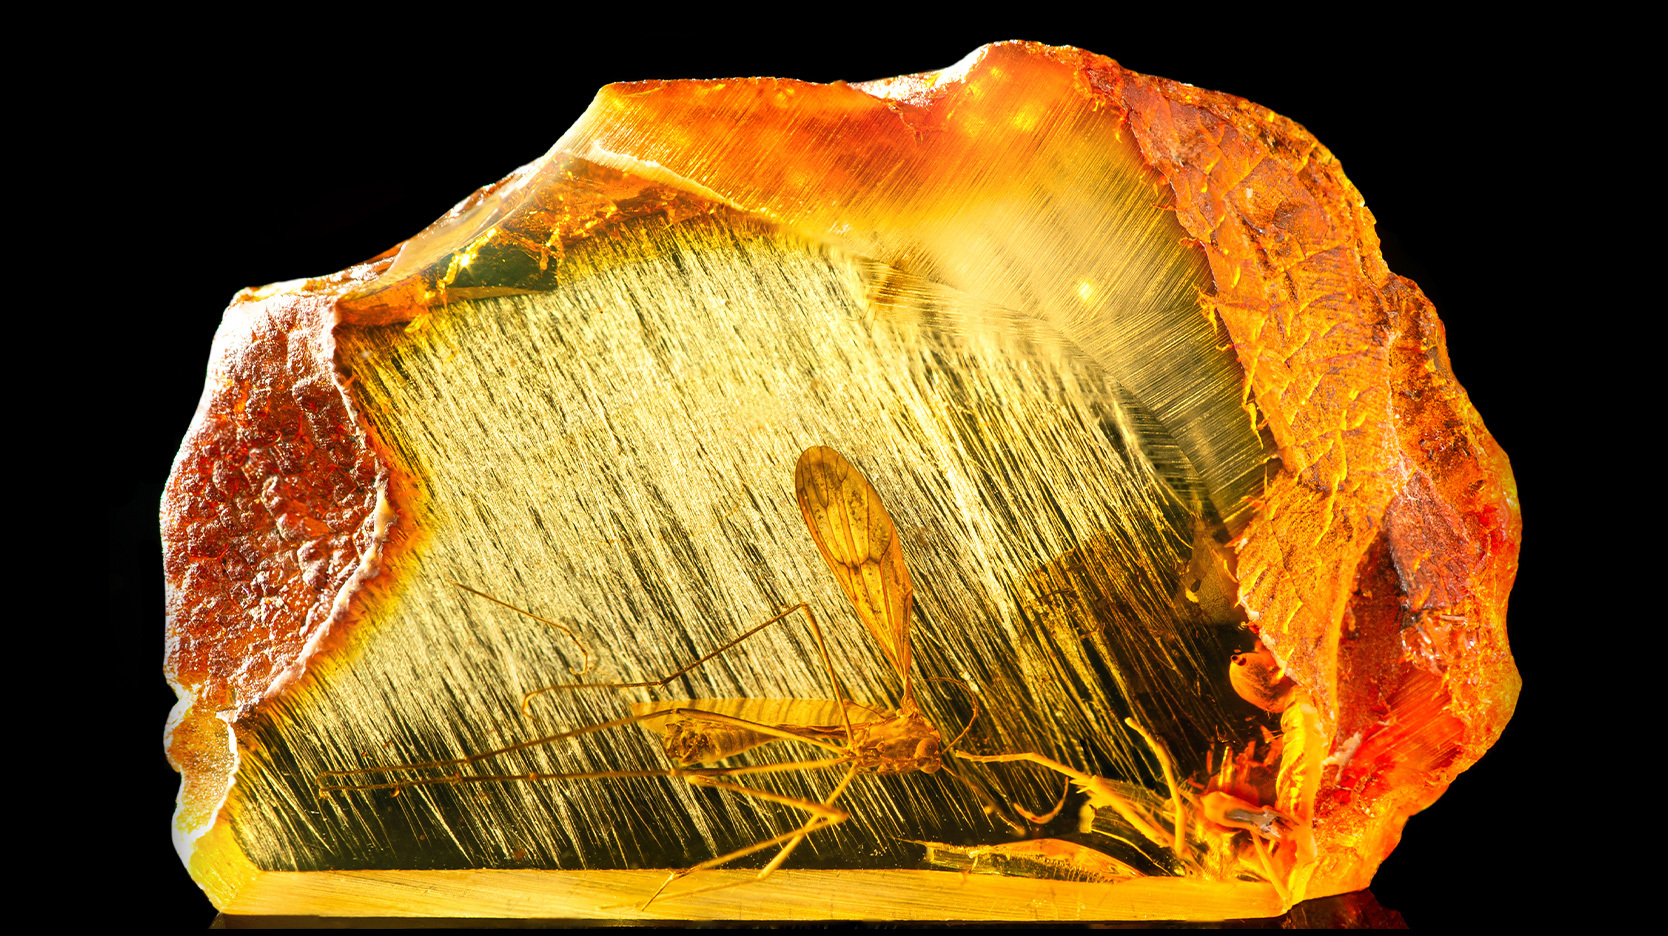 Baltic amber containing part of an ancient fossilized dragonfly